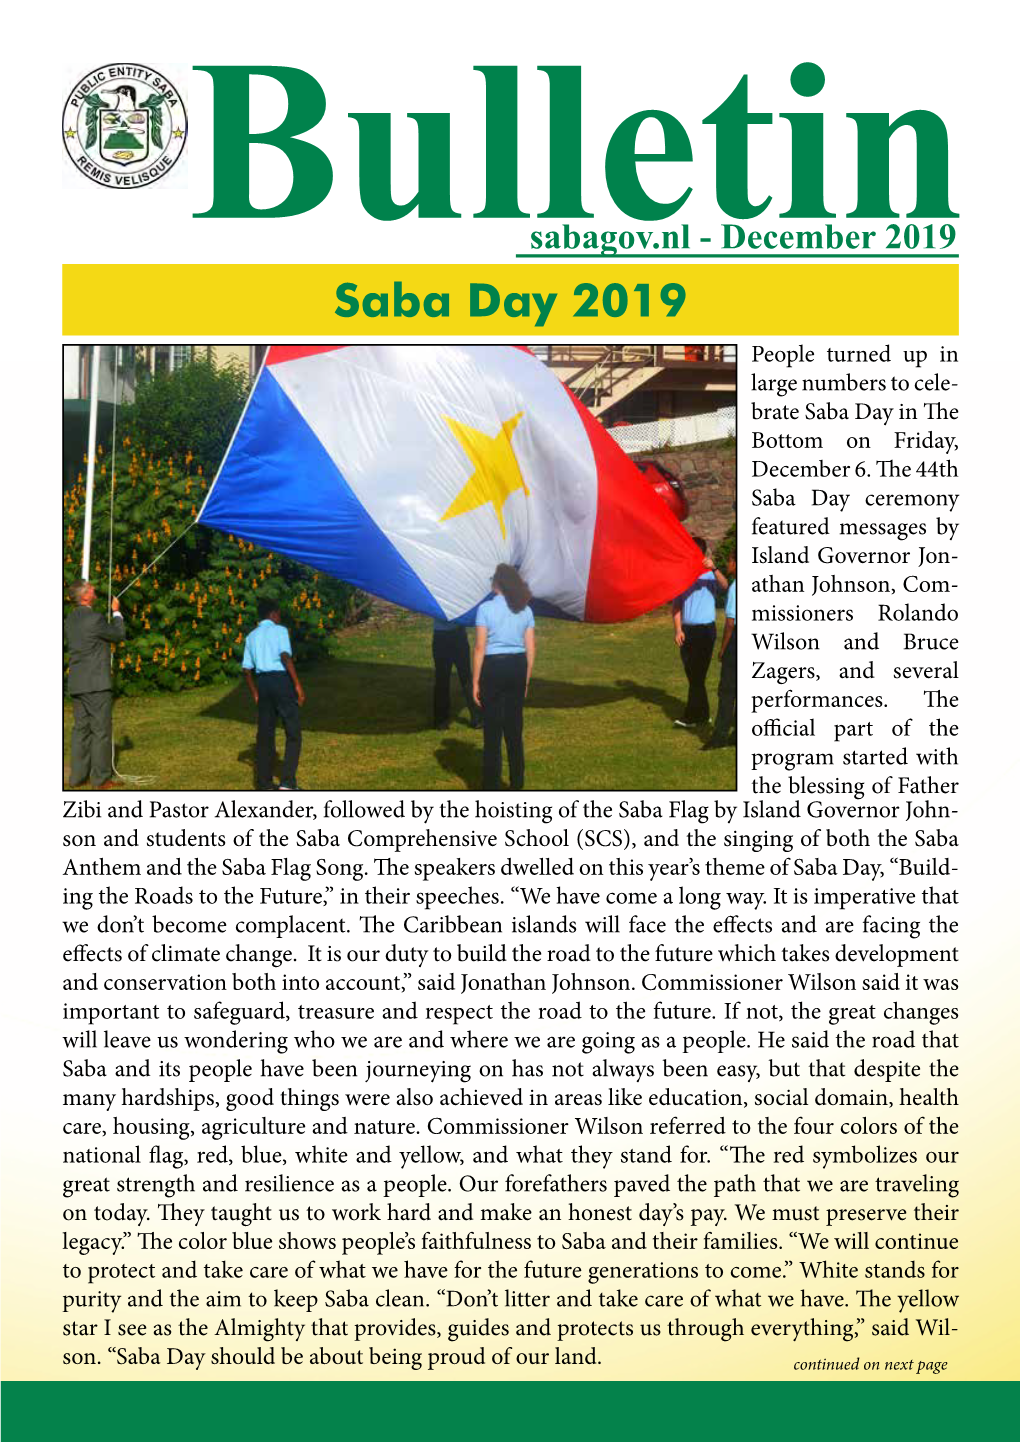 Saba Day 2019 People Turned up in Large Numbers to Cele- Brate Saba Day in the Bottom on Friday, December 6